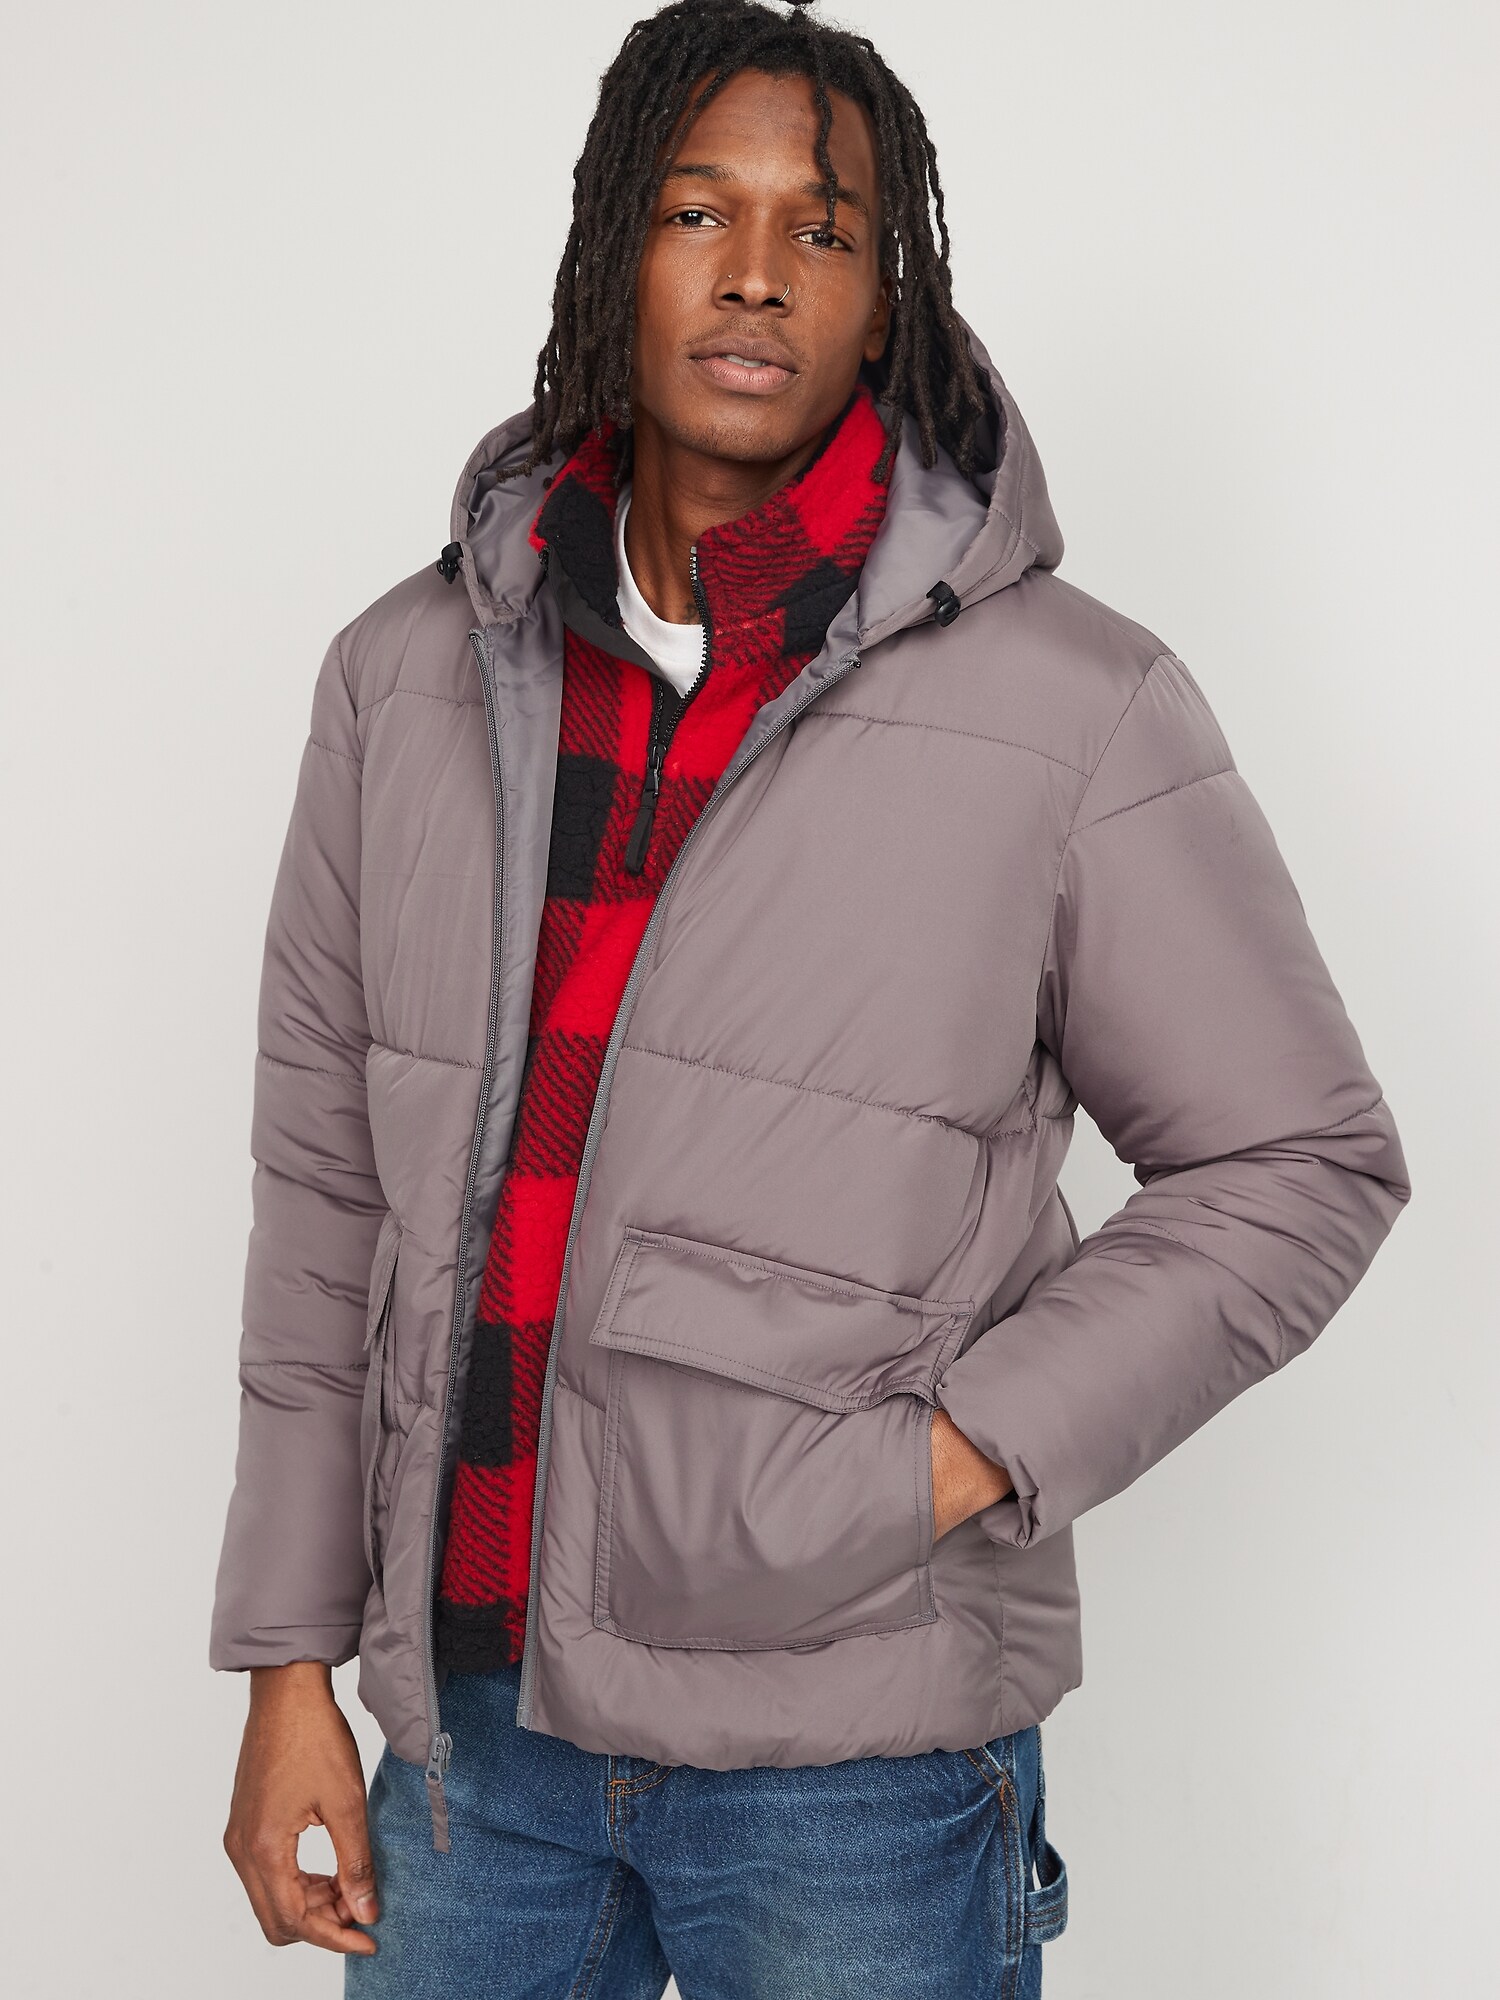 Old Navy Tech Utility Jacket for Men